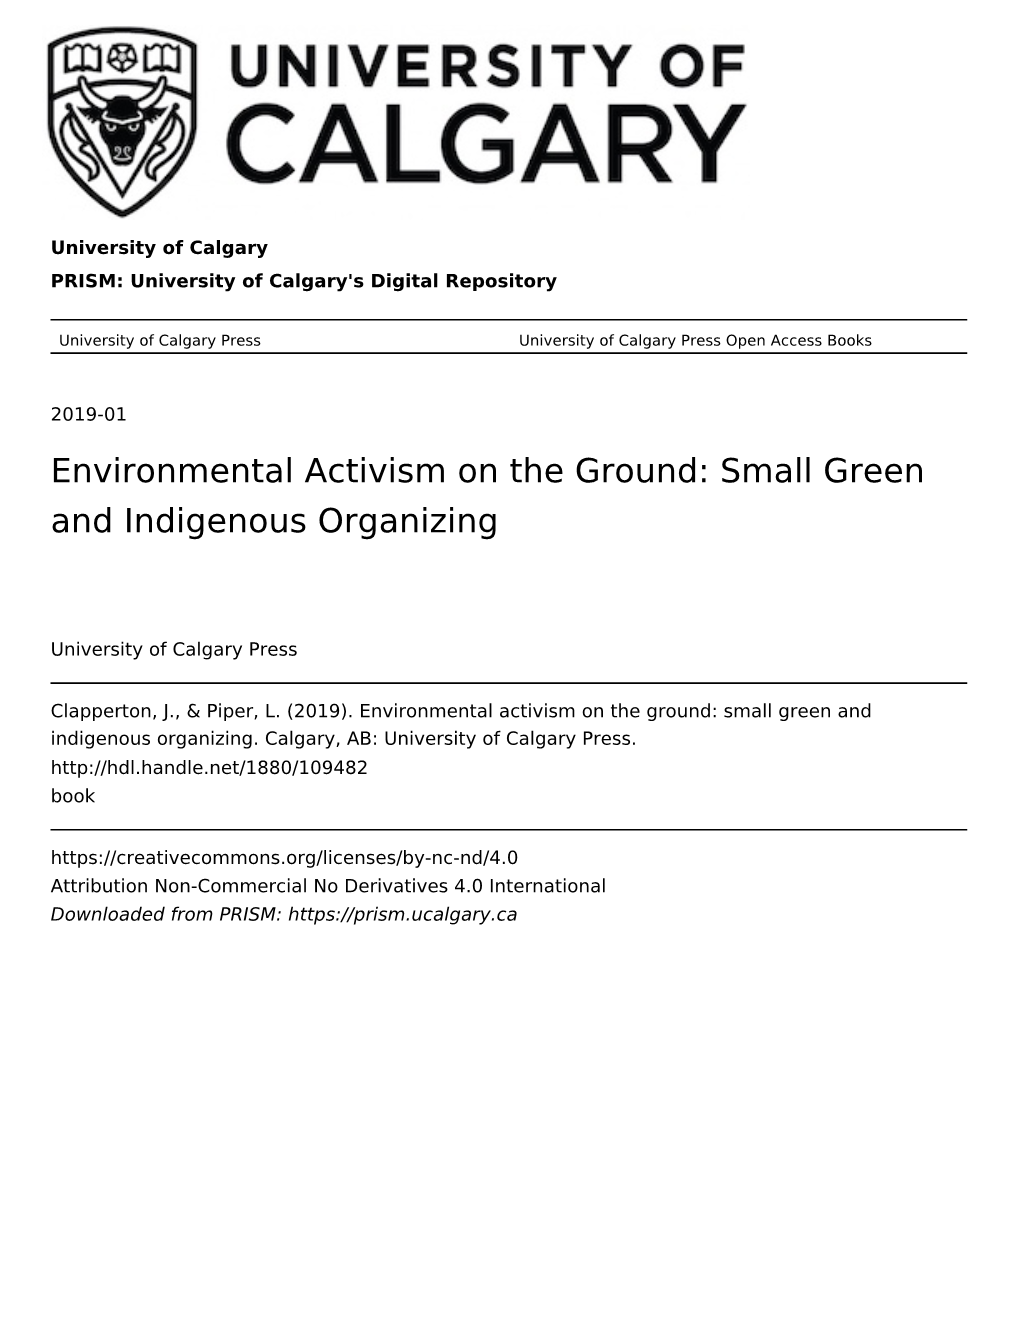 The Society for Pollution and Environmental Control (SPEC), British Columbia